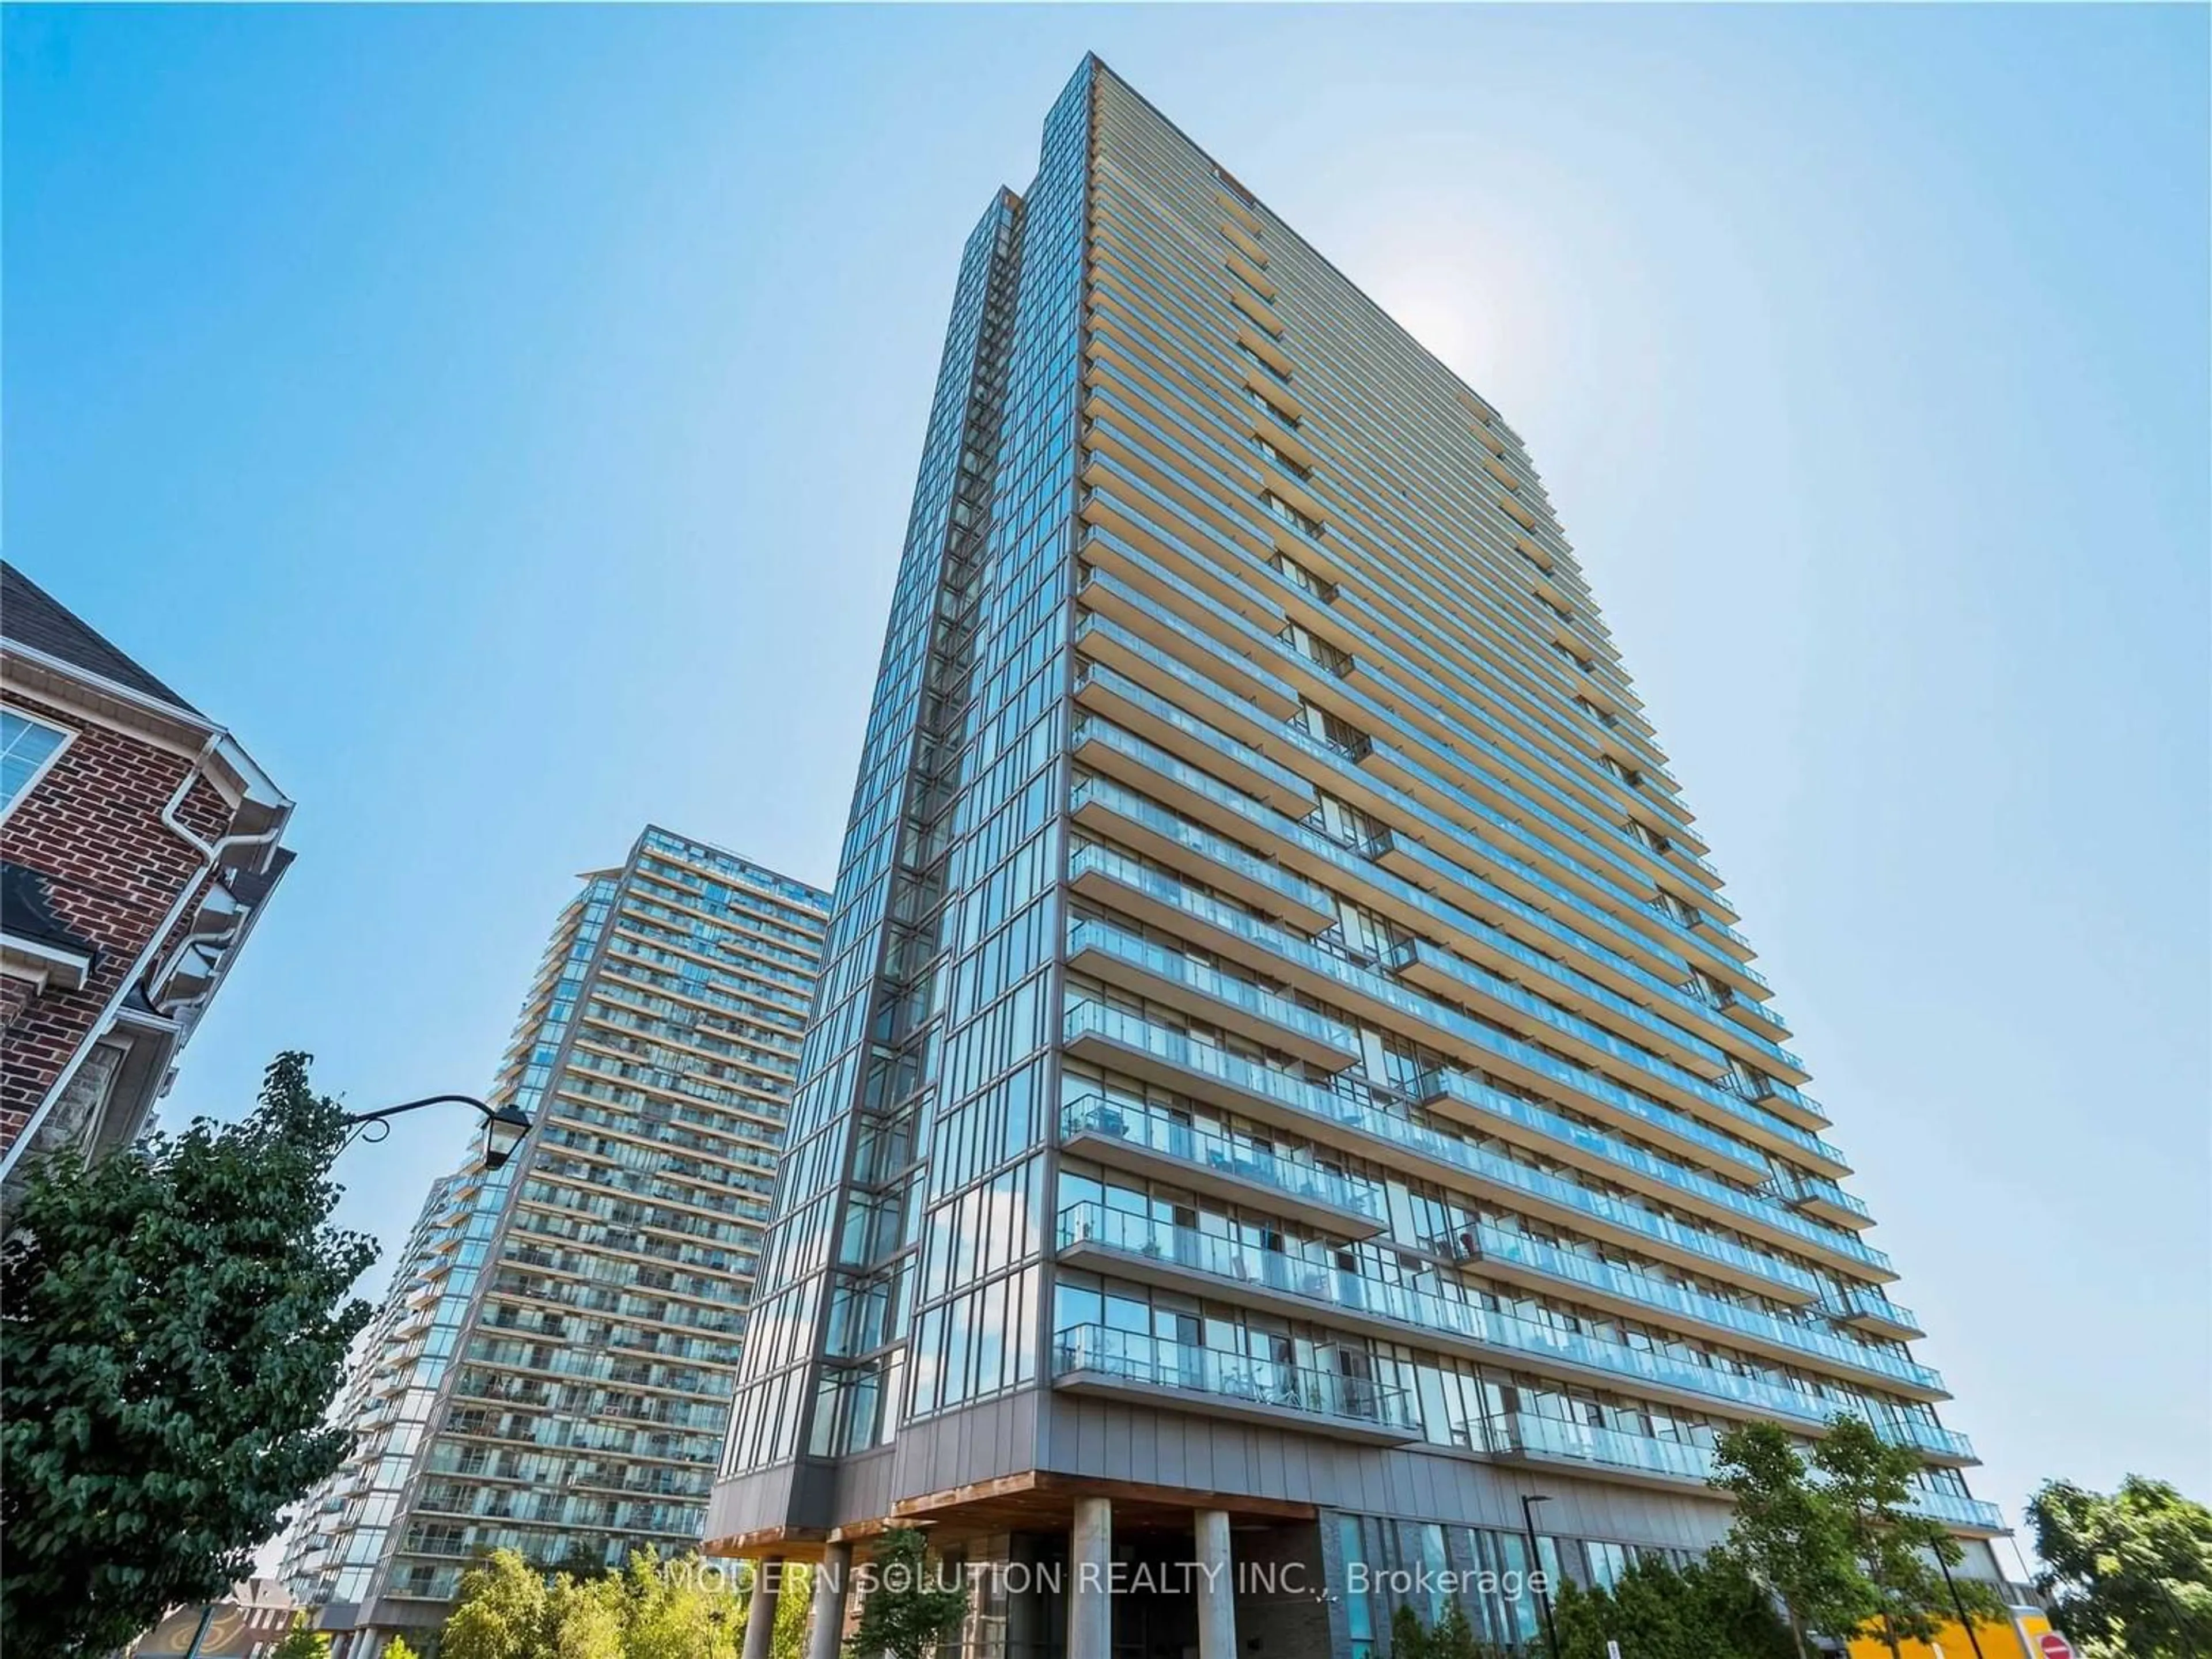 A pic from exterior of the house or condo for 105 The Queensway #508, Toronto Ontario M6P 2N2